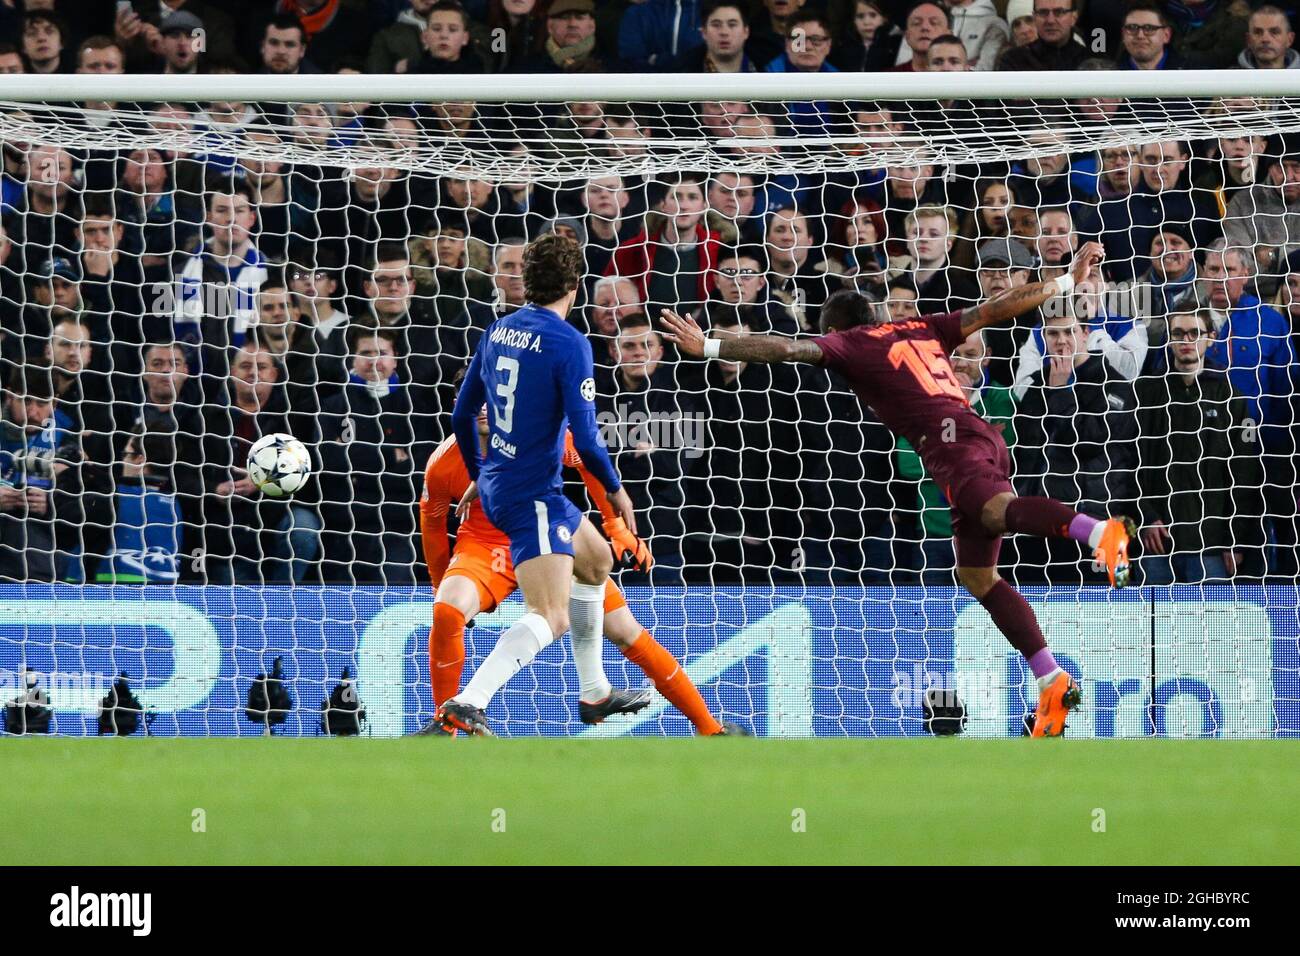 Barcelona's Paulinho has a header saved during the champions league match at Stamford Bridge Stadium, London. Picture date 20th February 2018. Picture credit should read: Charlie Forgahm-Bailey/Sportimage via PA Images Stock Photo